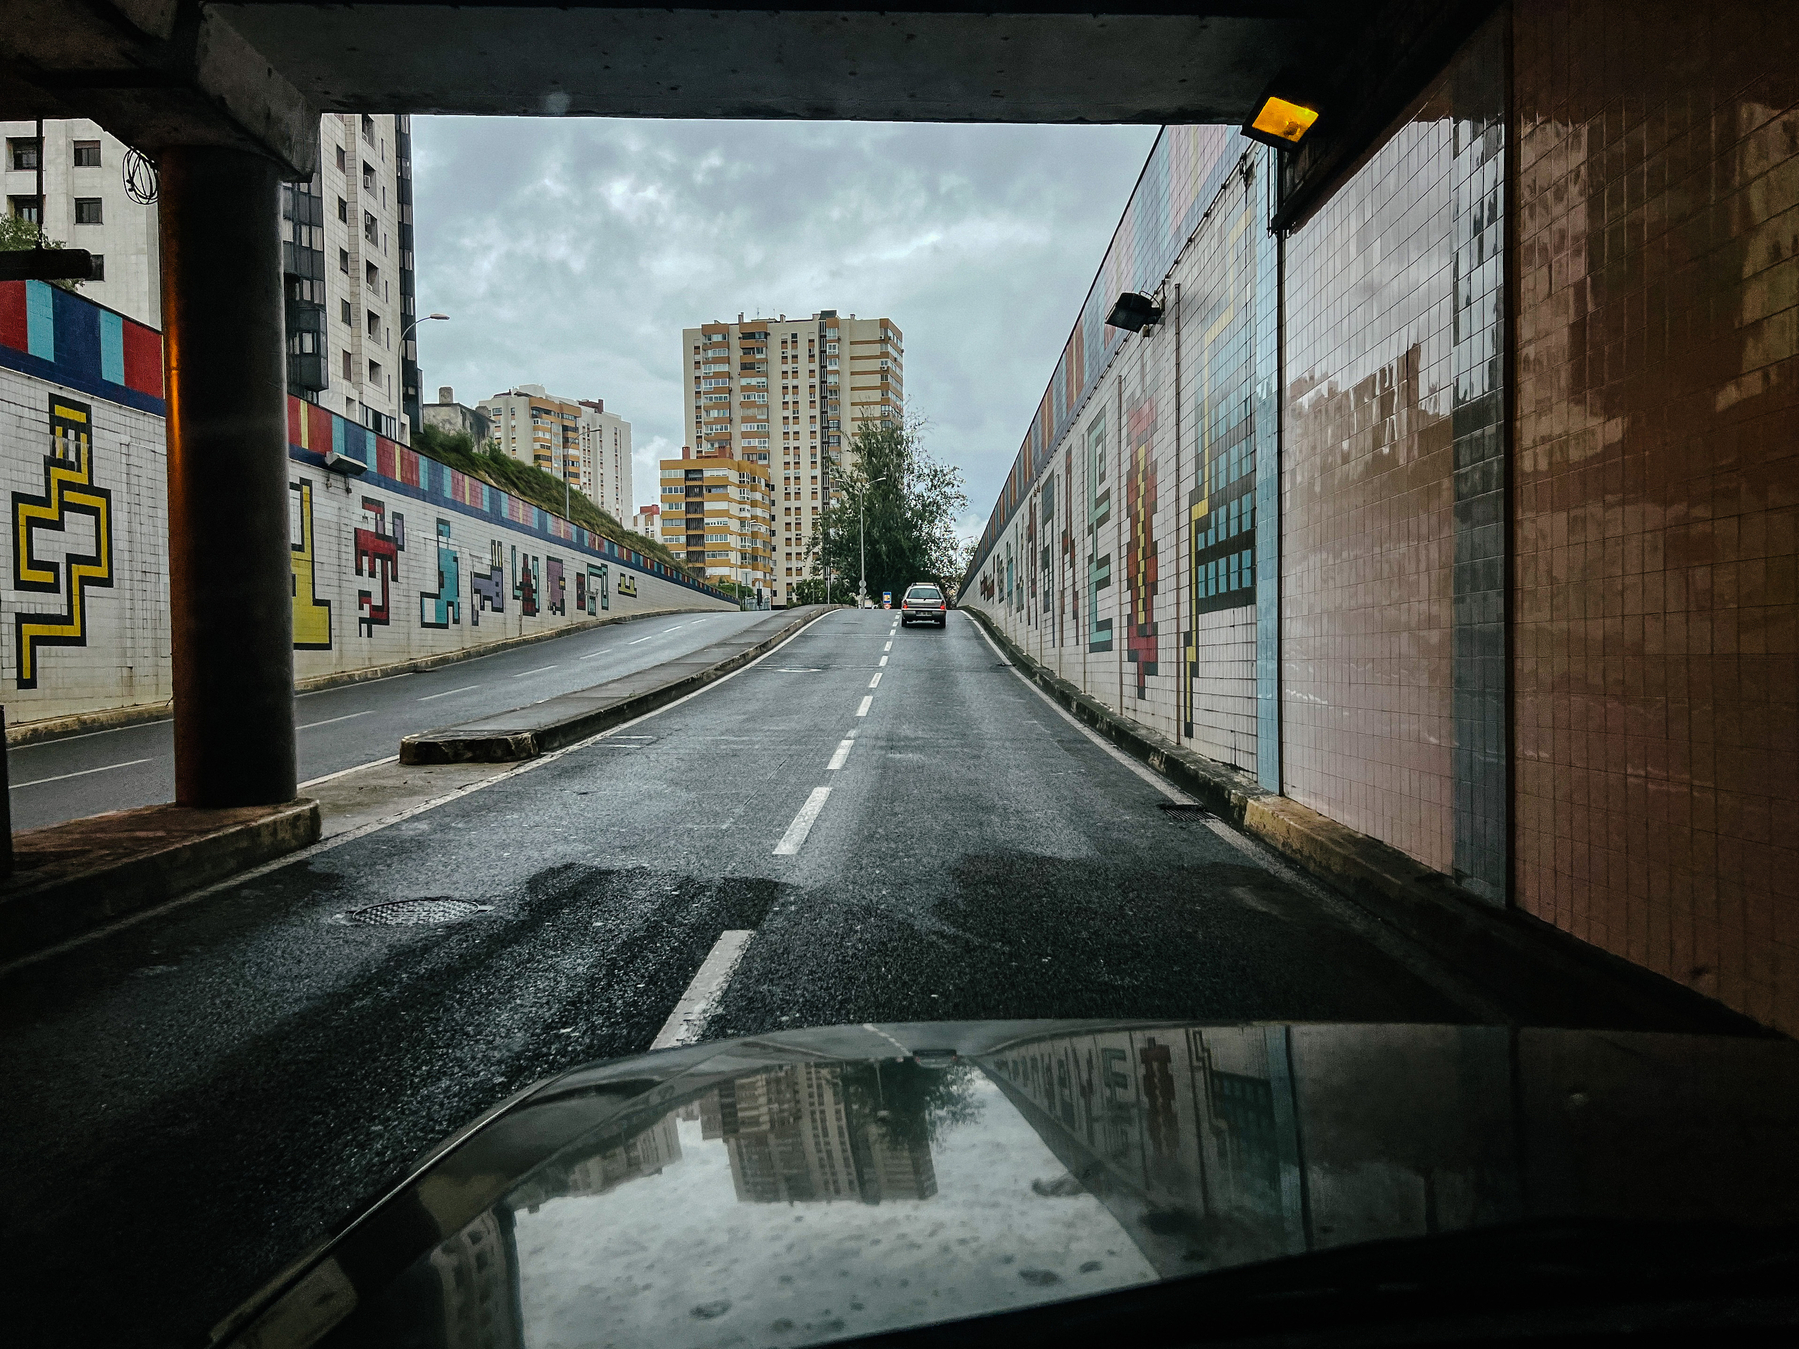 From the drivers seat, exiting a tunnel. A building up ahead, street art on the tunnel’s walls